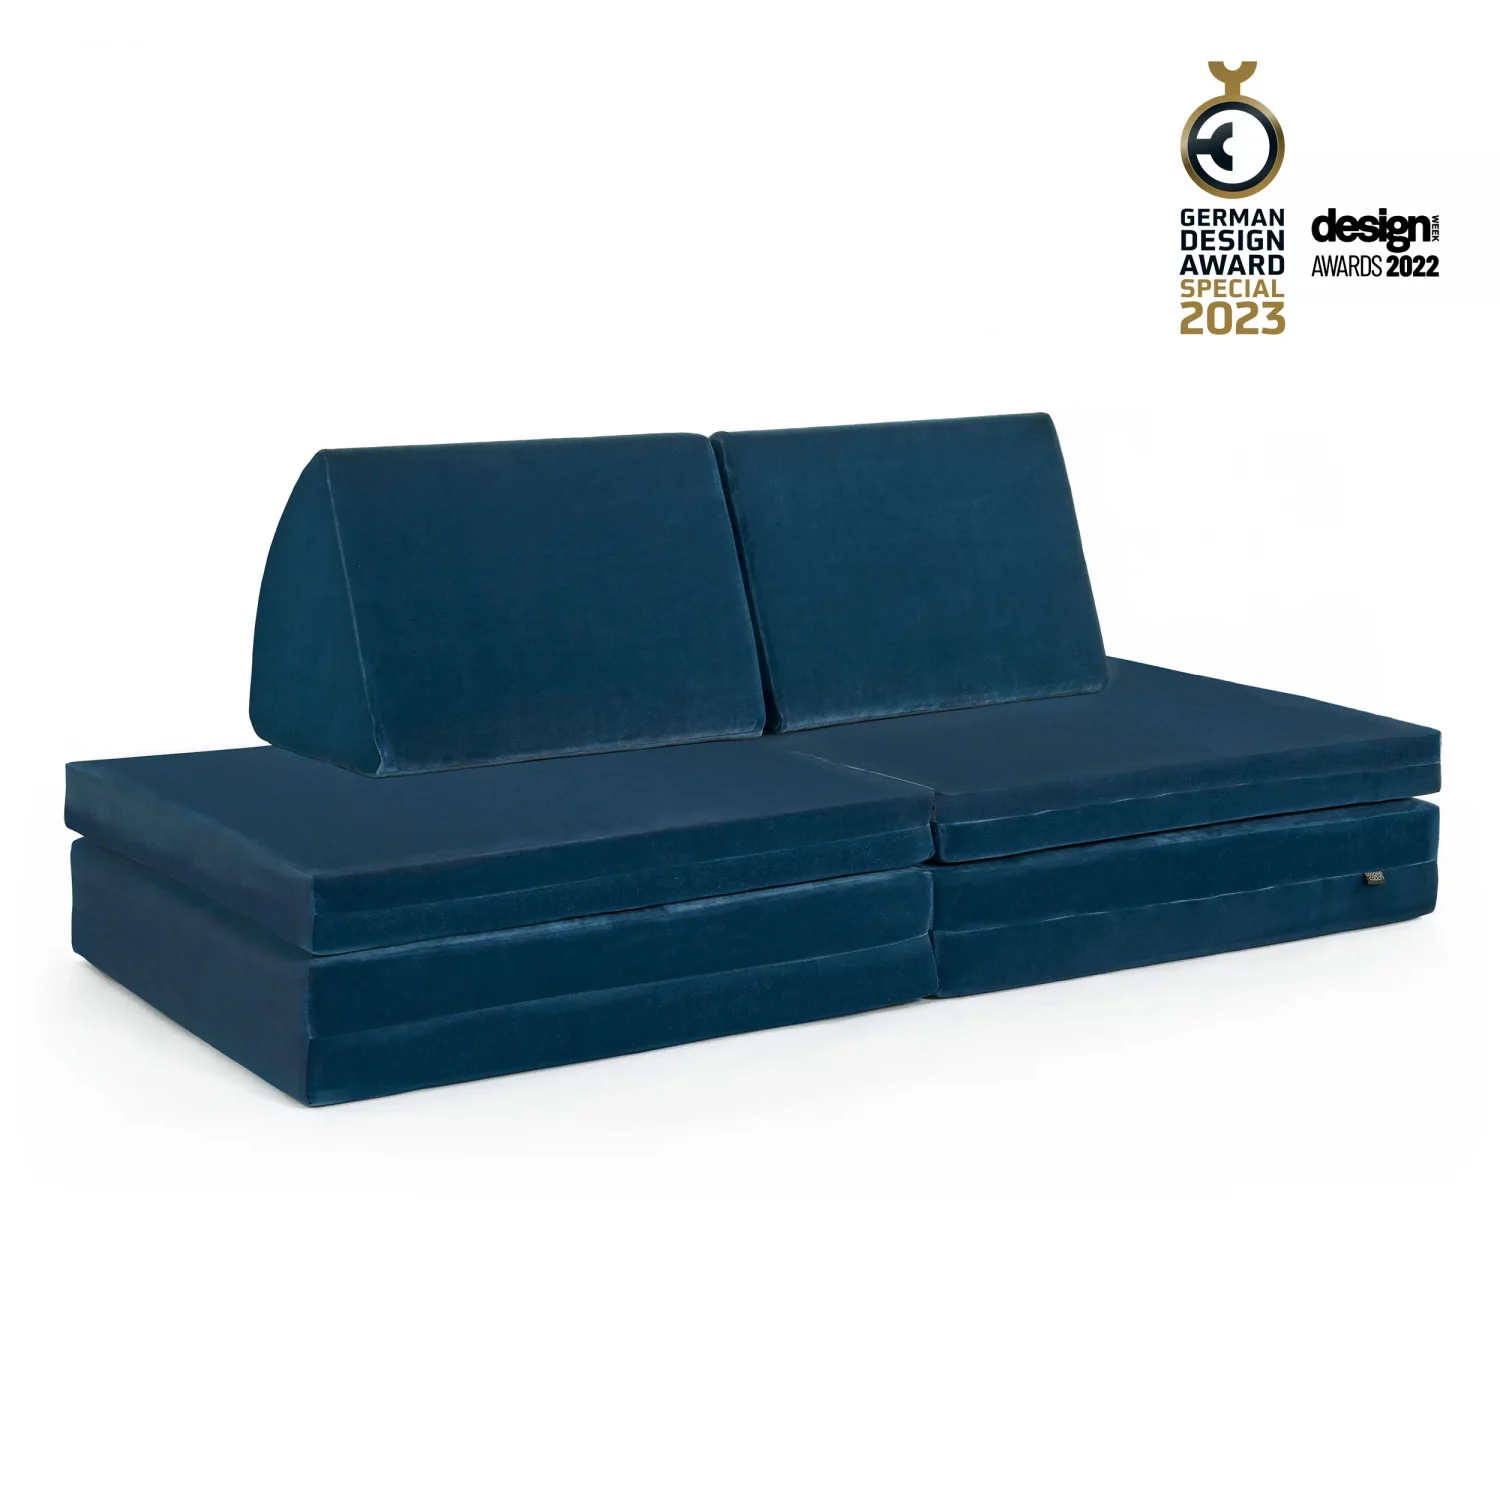 coogeecouch | Award | German Design Award 2023  | Kindersofa | Serie: meeracle | Farbe: sea-blue hellblau | Ansicht: Front schräg | made in Germany